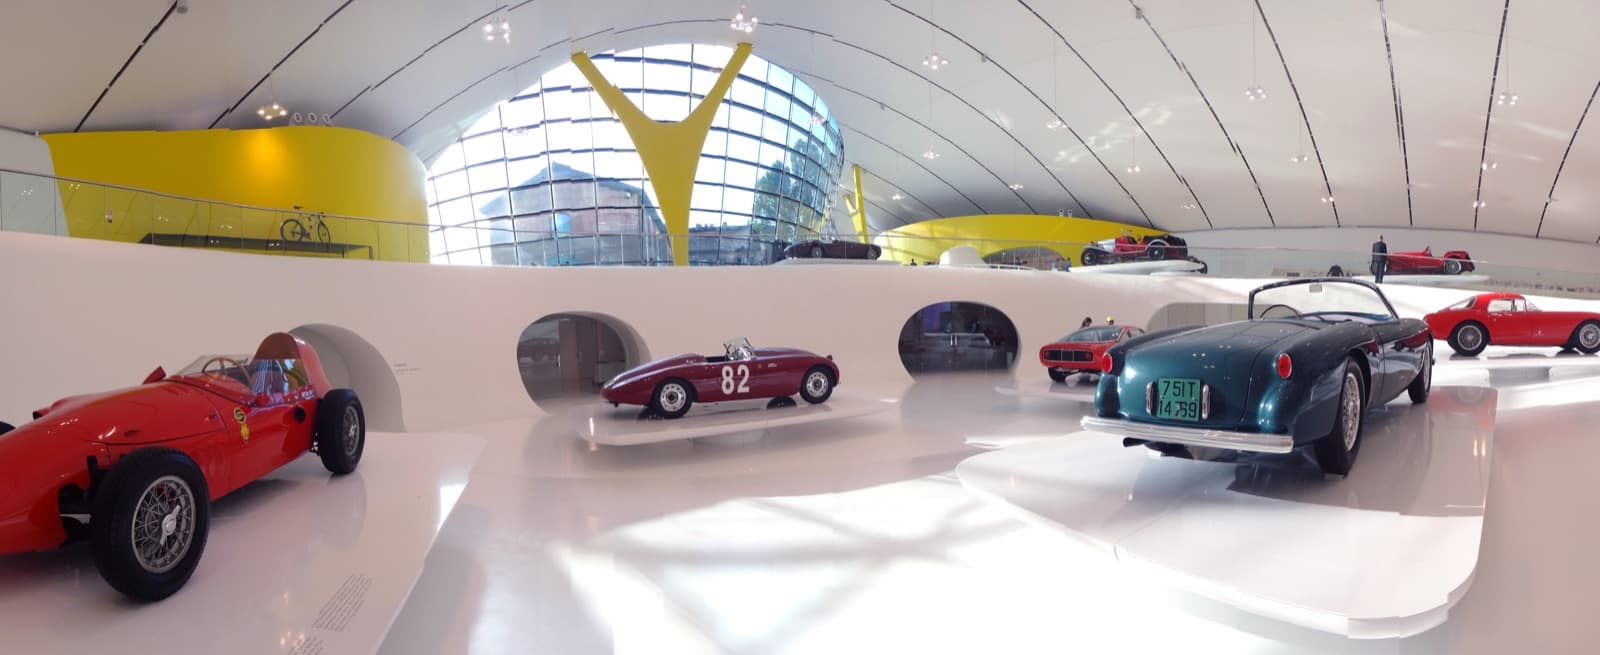 Modena,Enzo Ferrari Museum Ph. D-VISIONS via shutterstock editorial use only